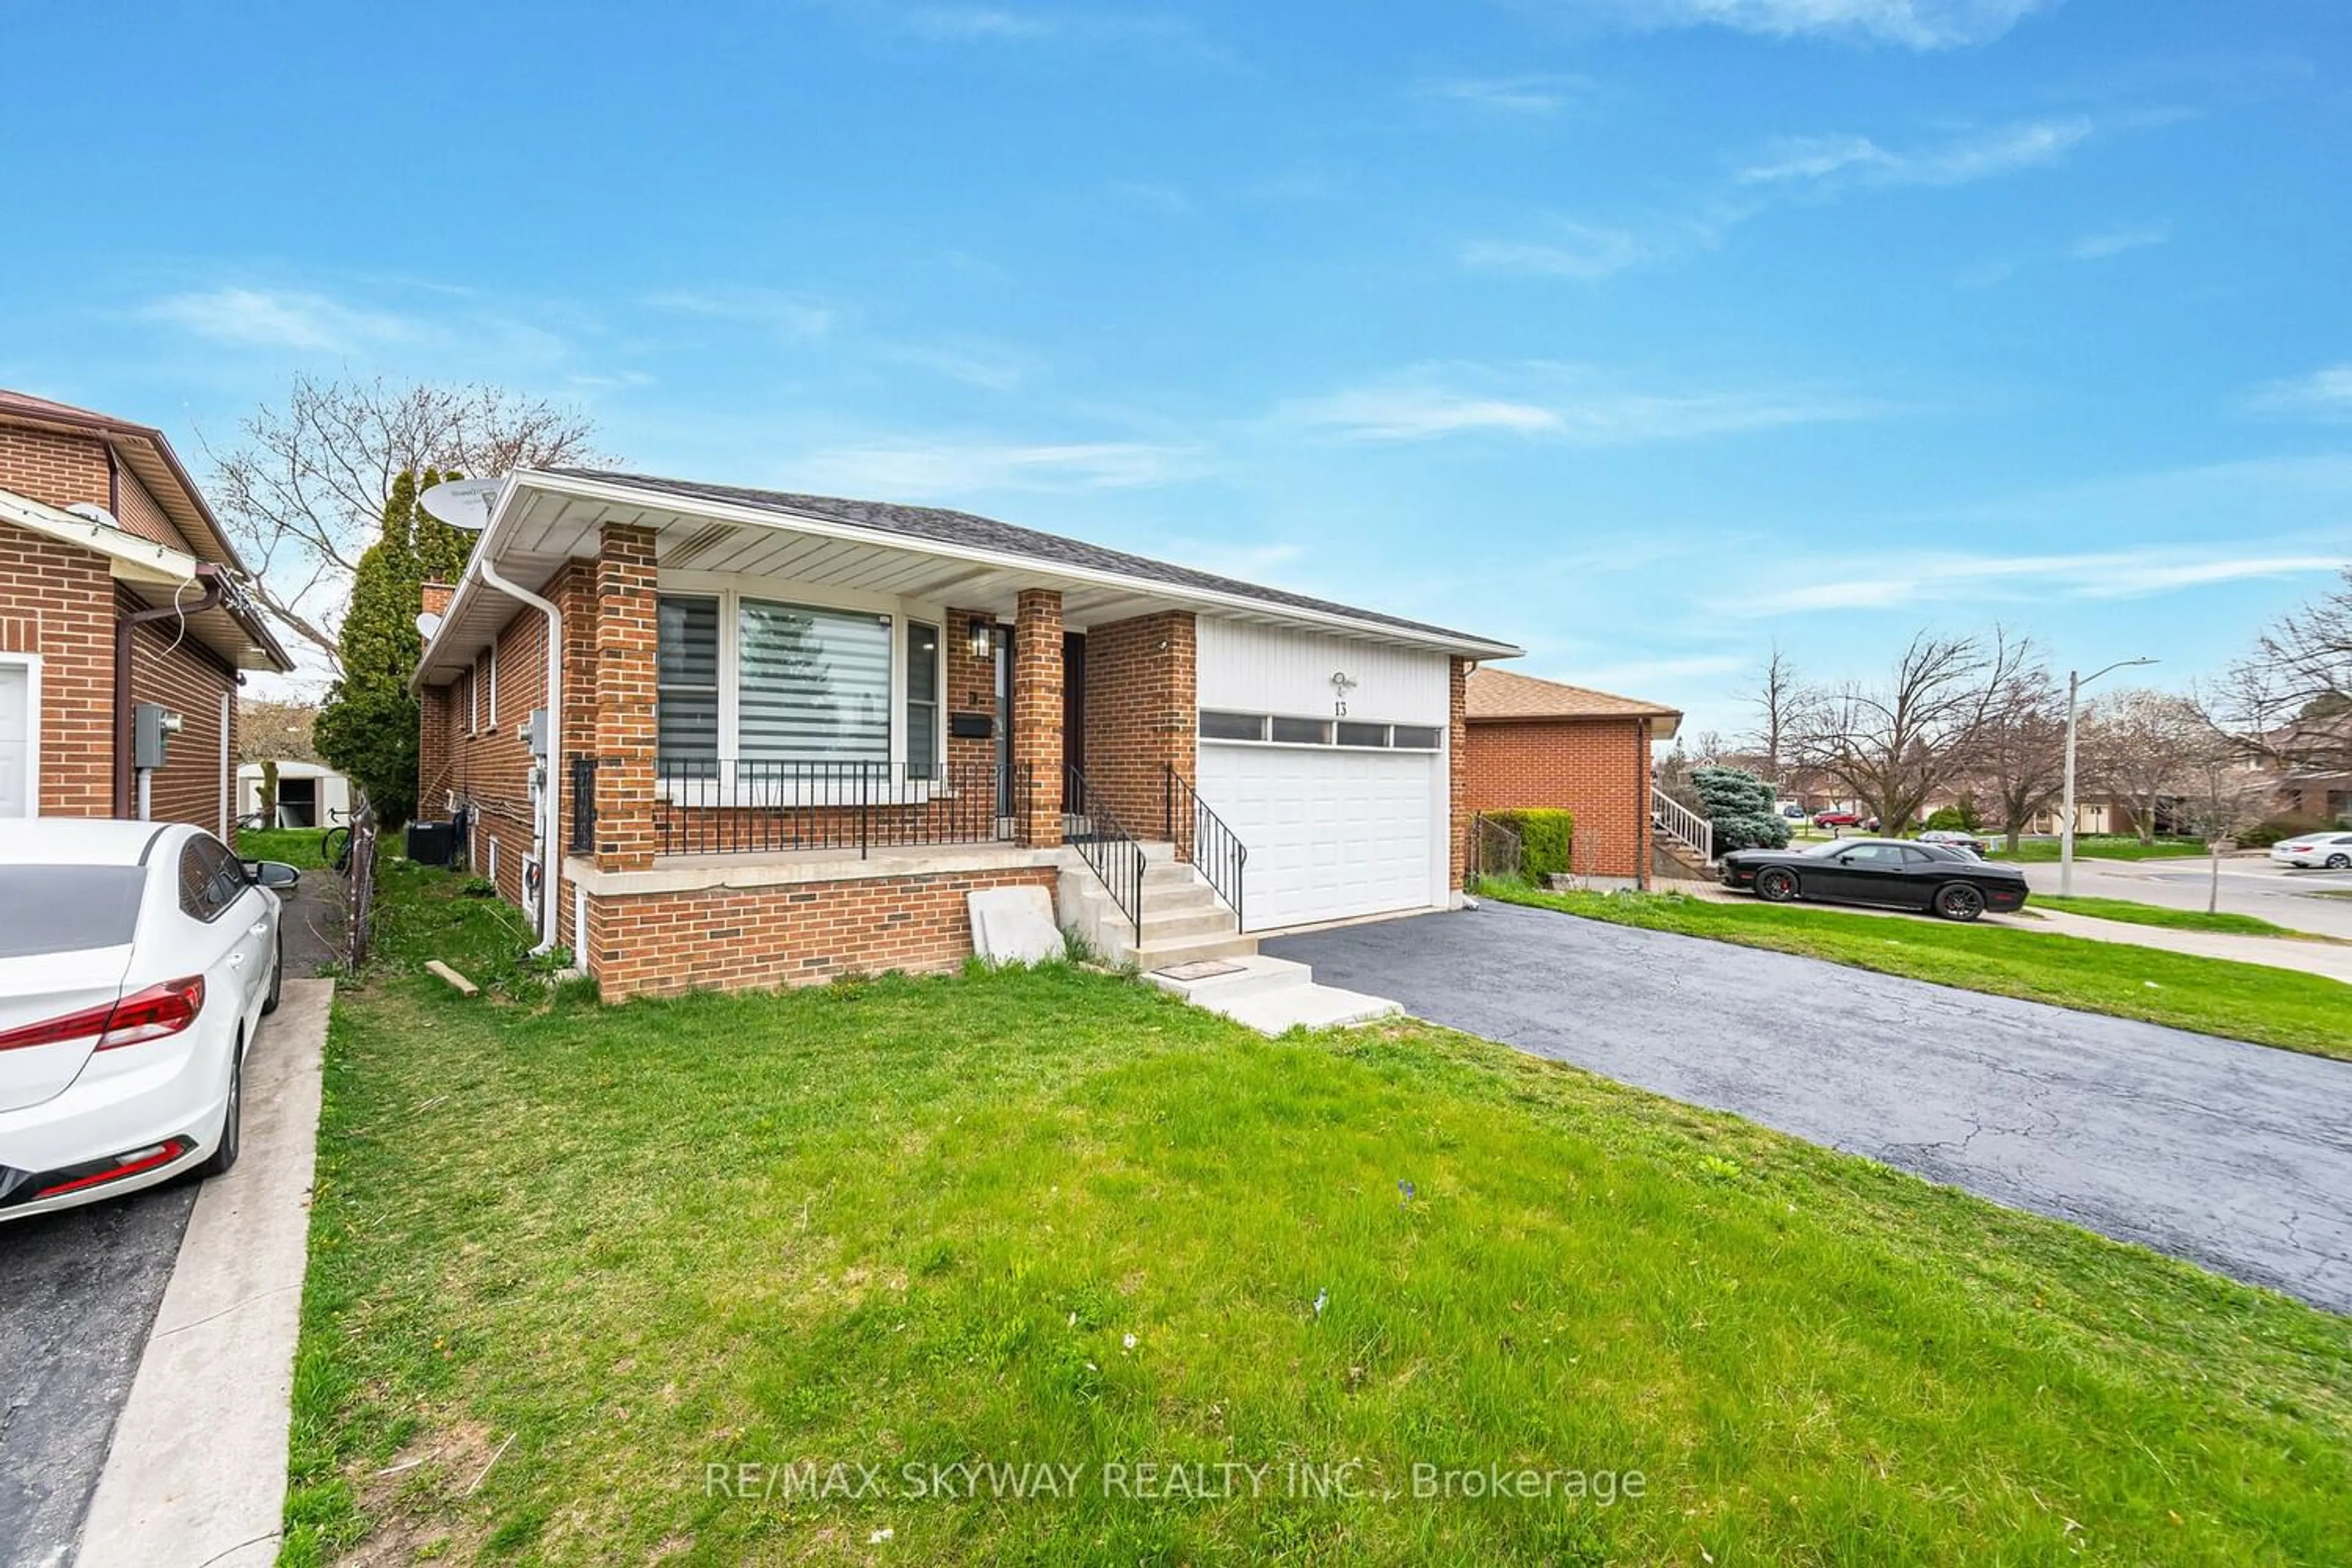 Home with brick exterior material for 13 Panorama Cres, Brampton Ontario L6S 3T7